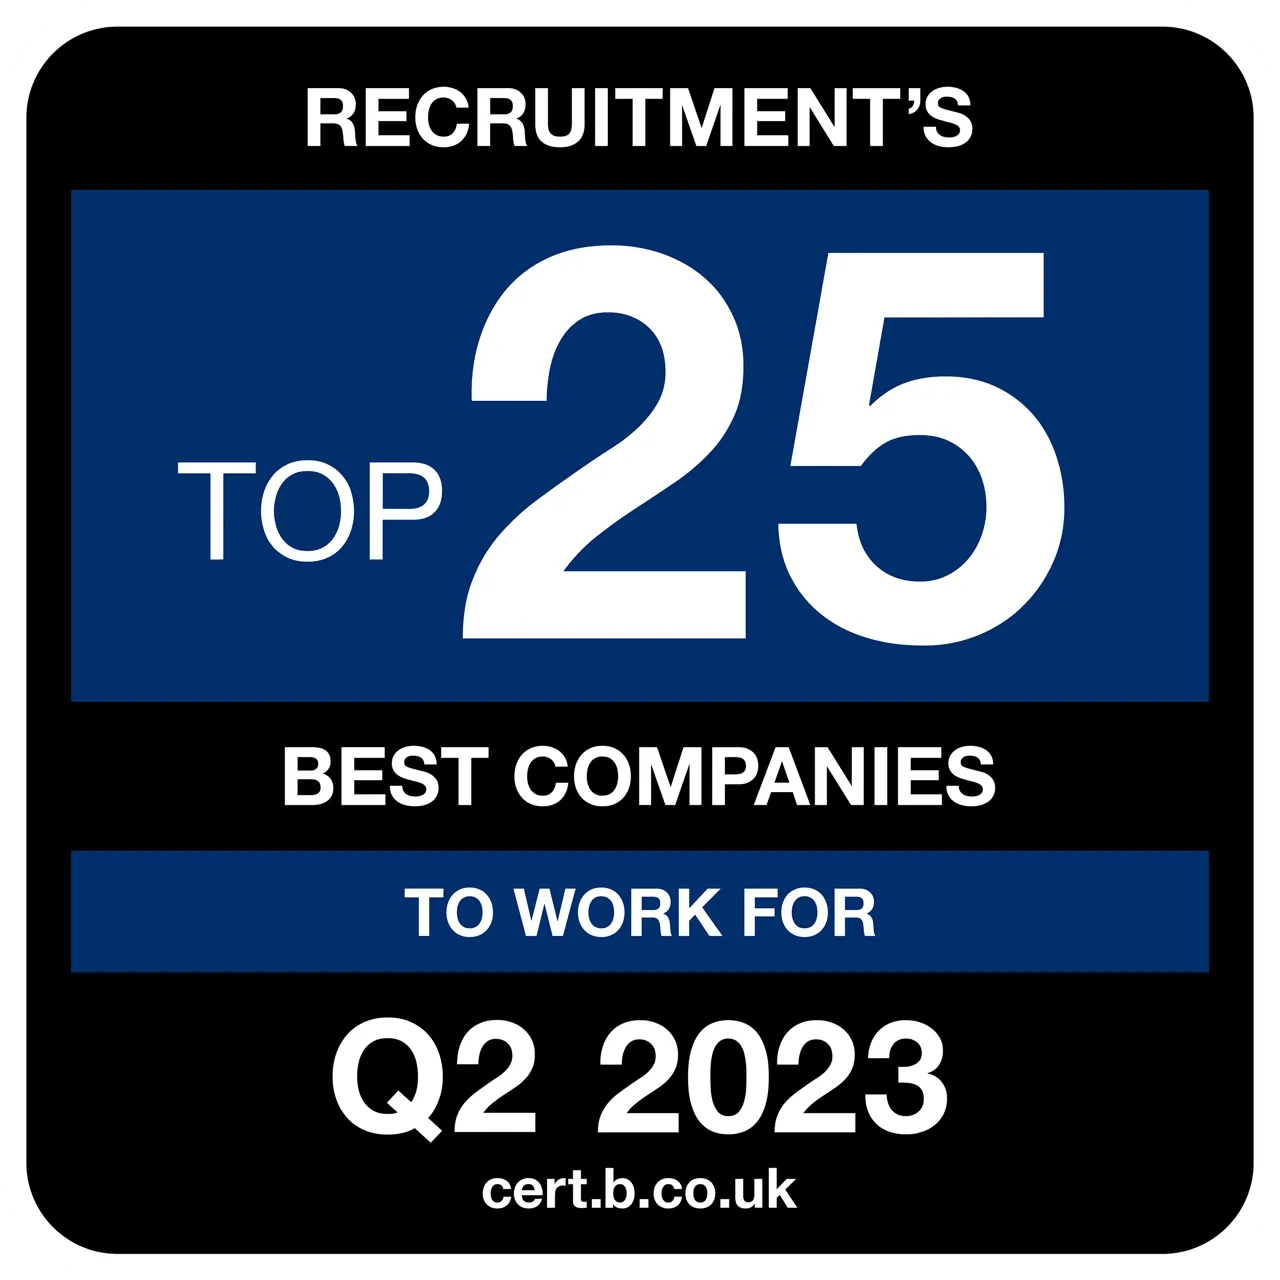 Best Companies Top 25 recruitment companies to work for